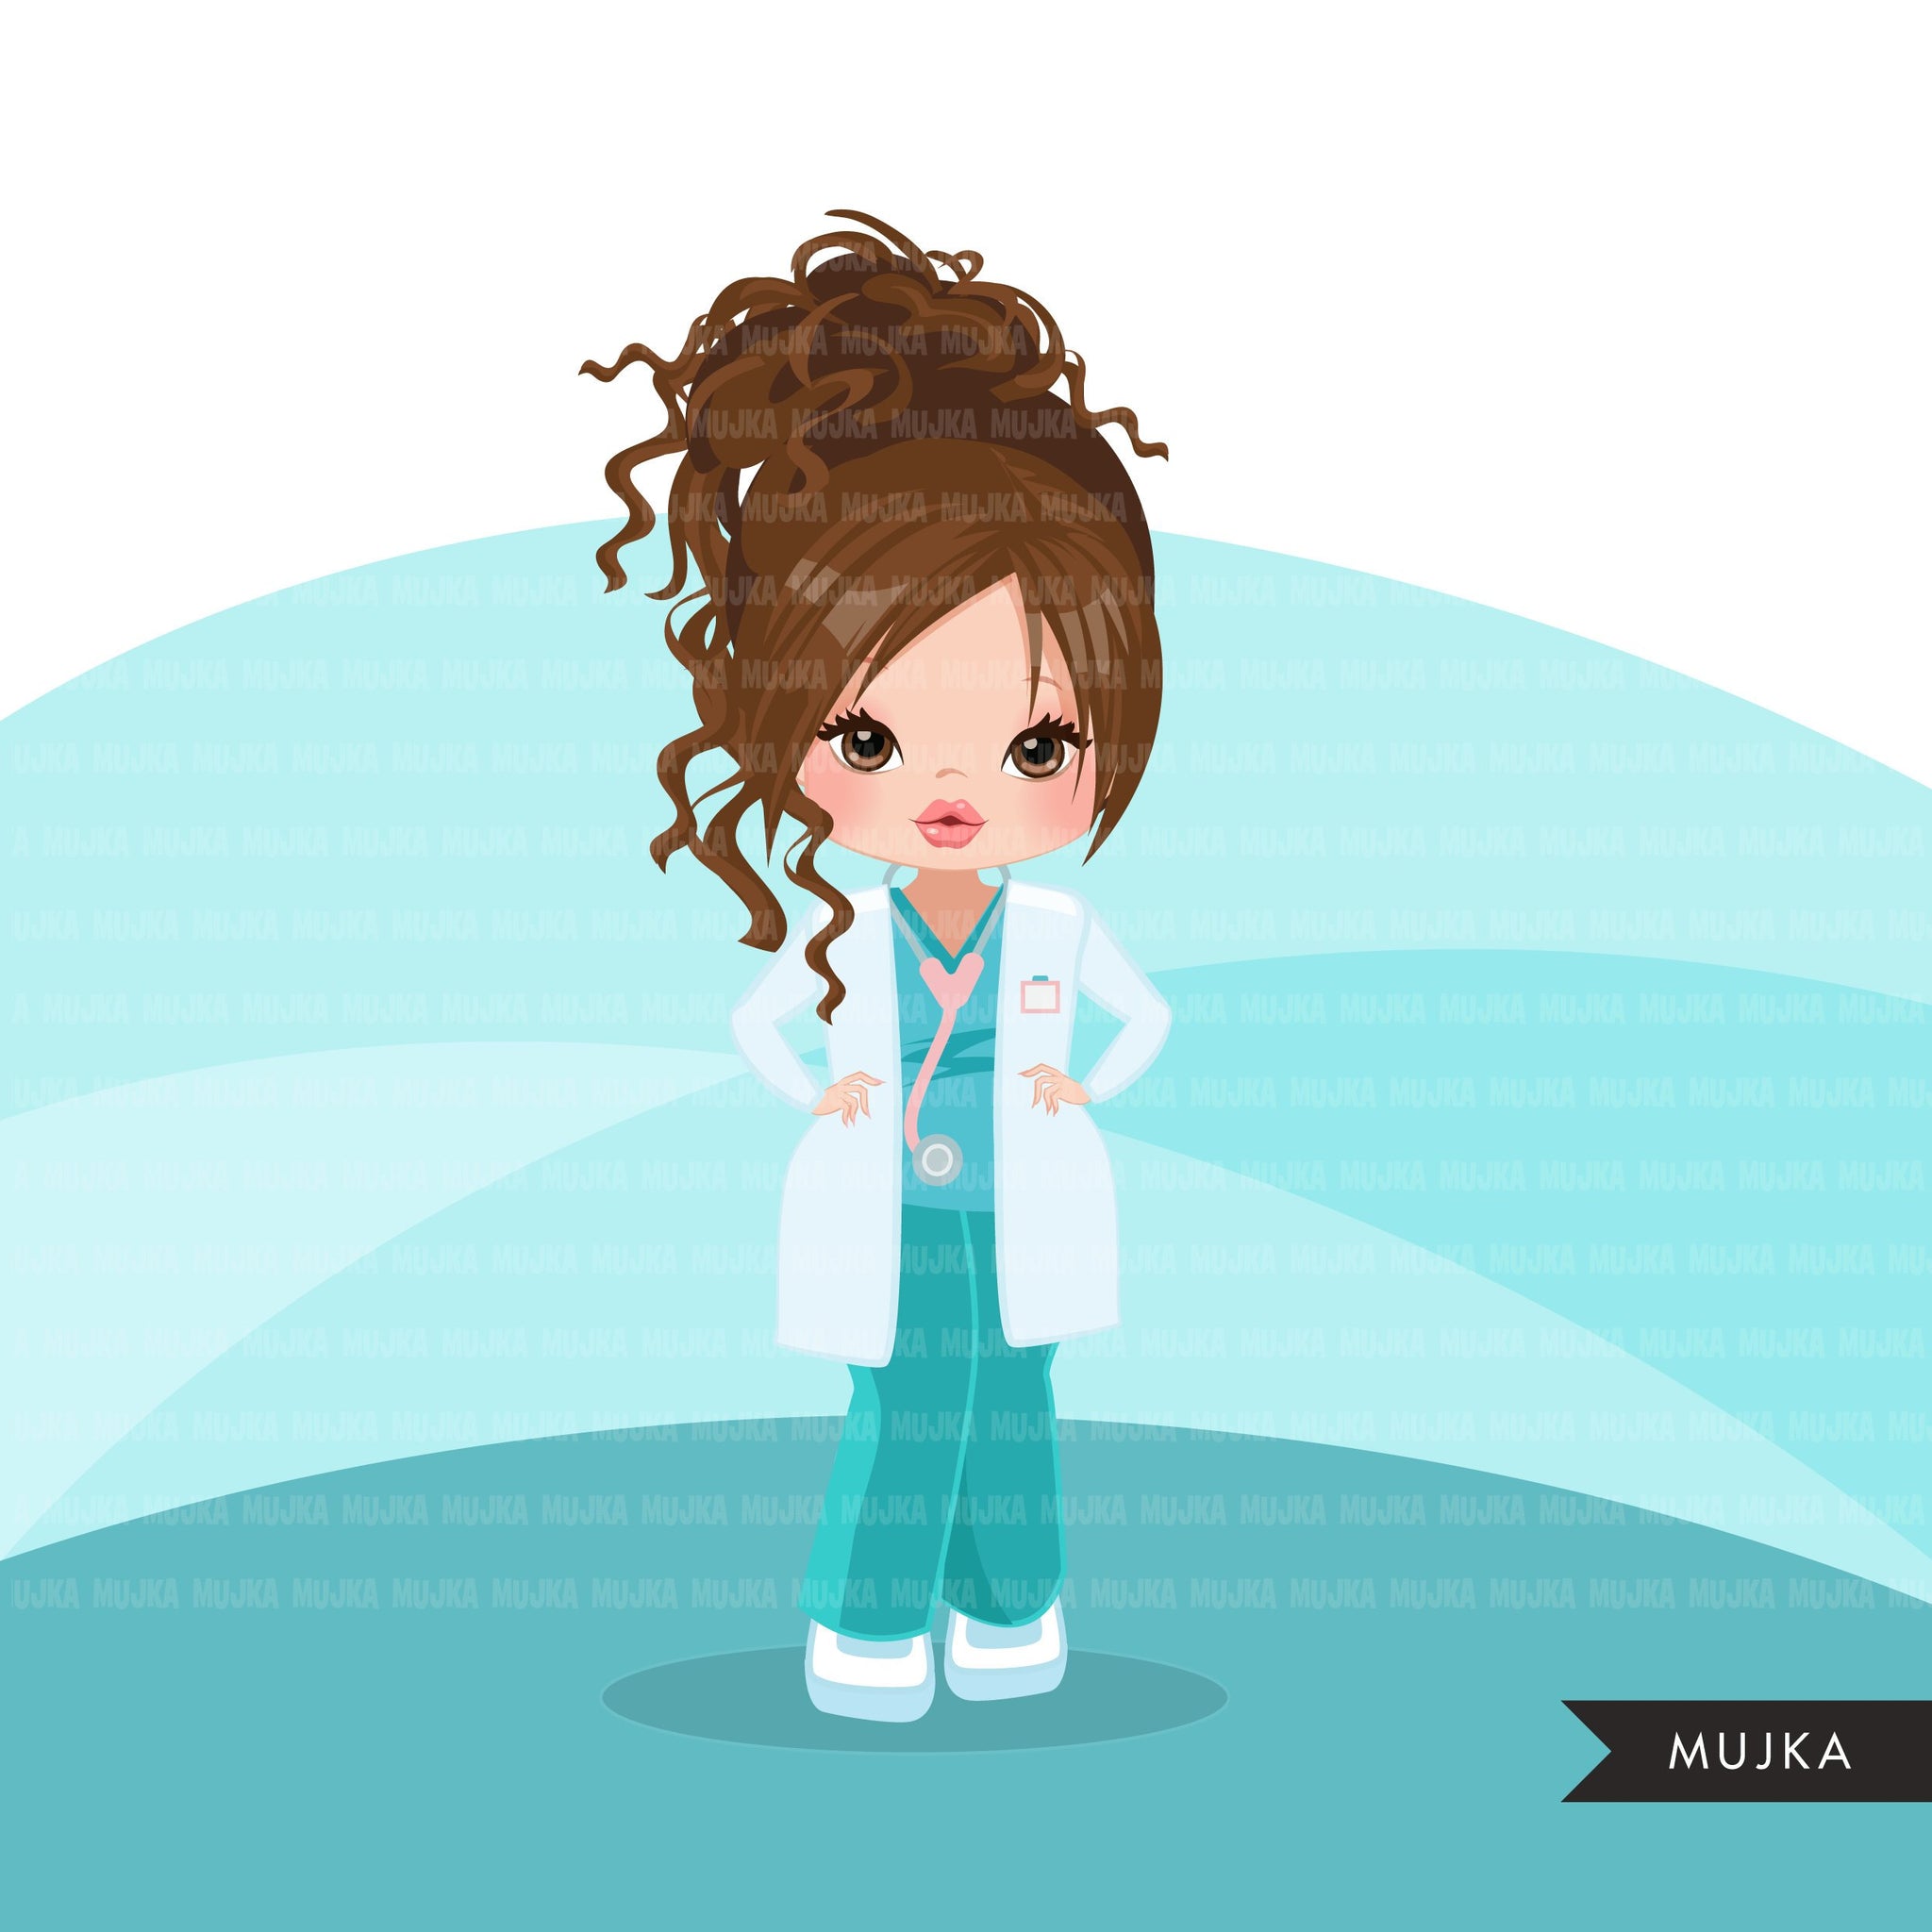 Doctor clipart with scrubs , patient chart graphics, print and cut PNG T-Shirt Designs, Medical clip art